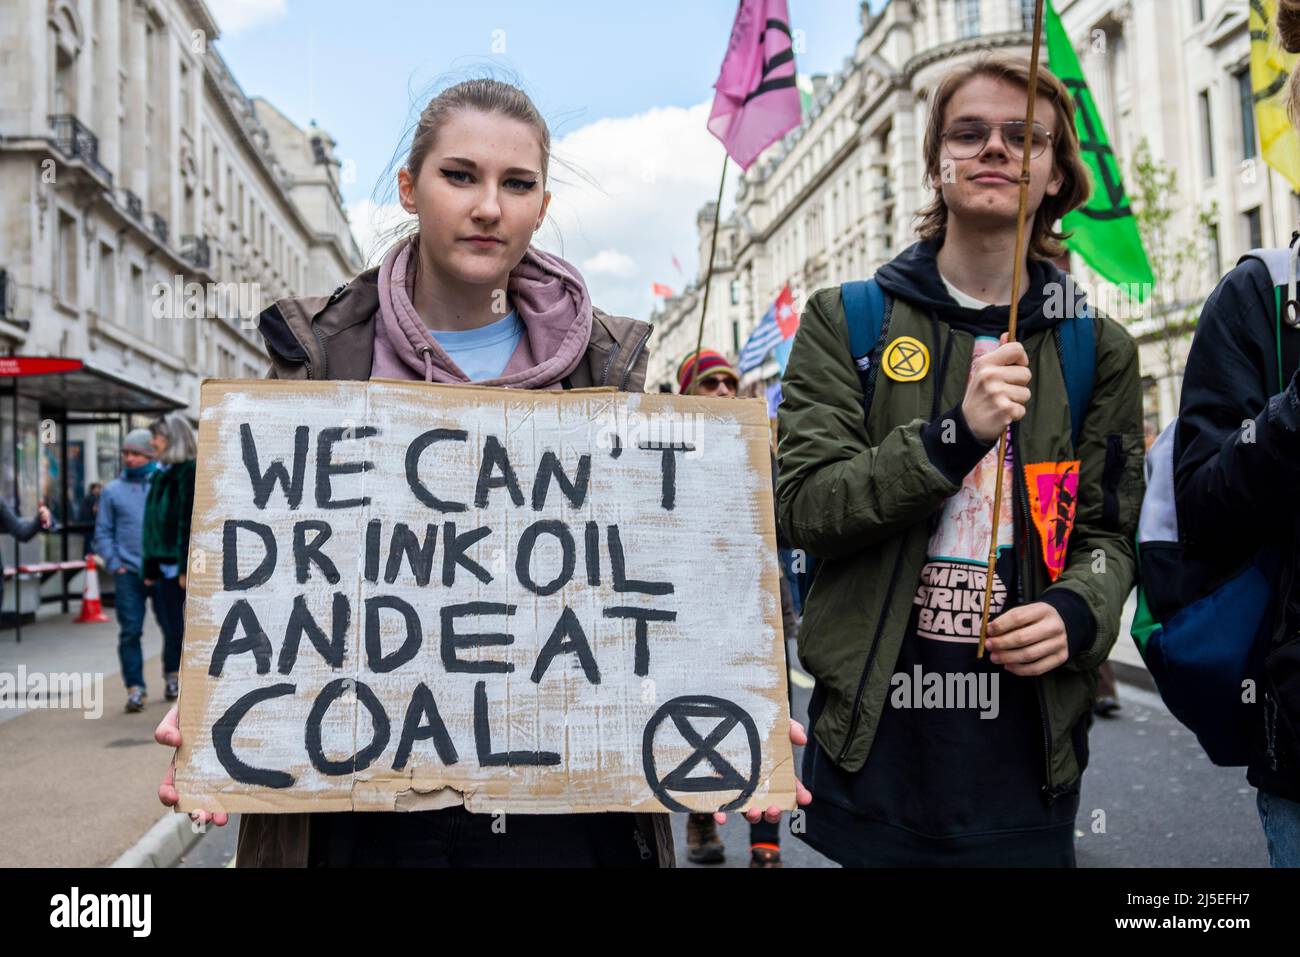 Extinction Rebellion protest placard. We can't drink oil and eat coal. Fossil fuels protesters Stock Photo